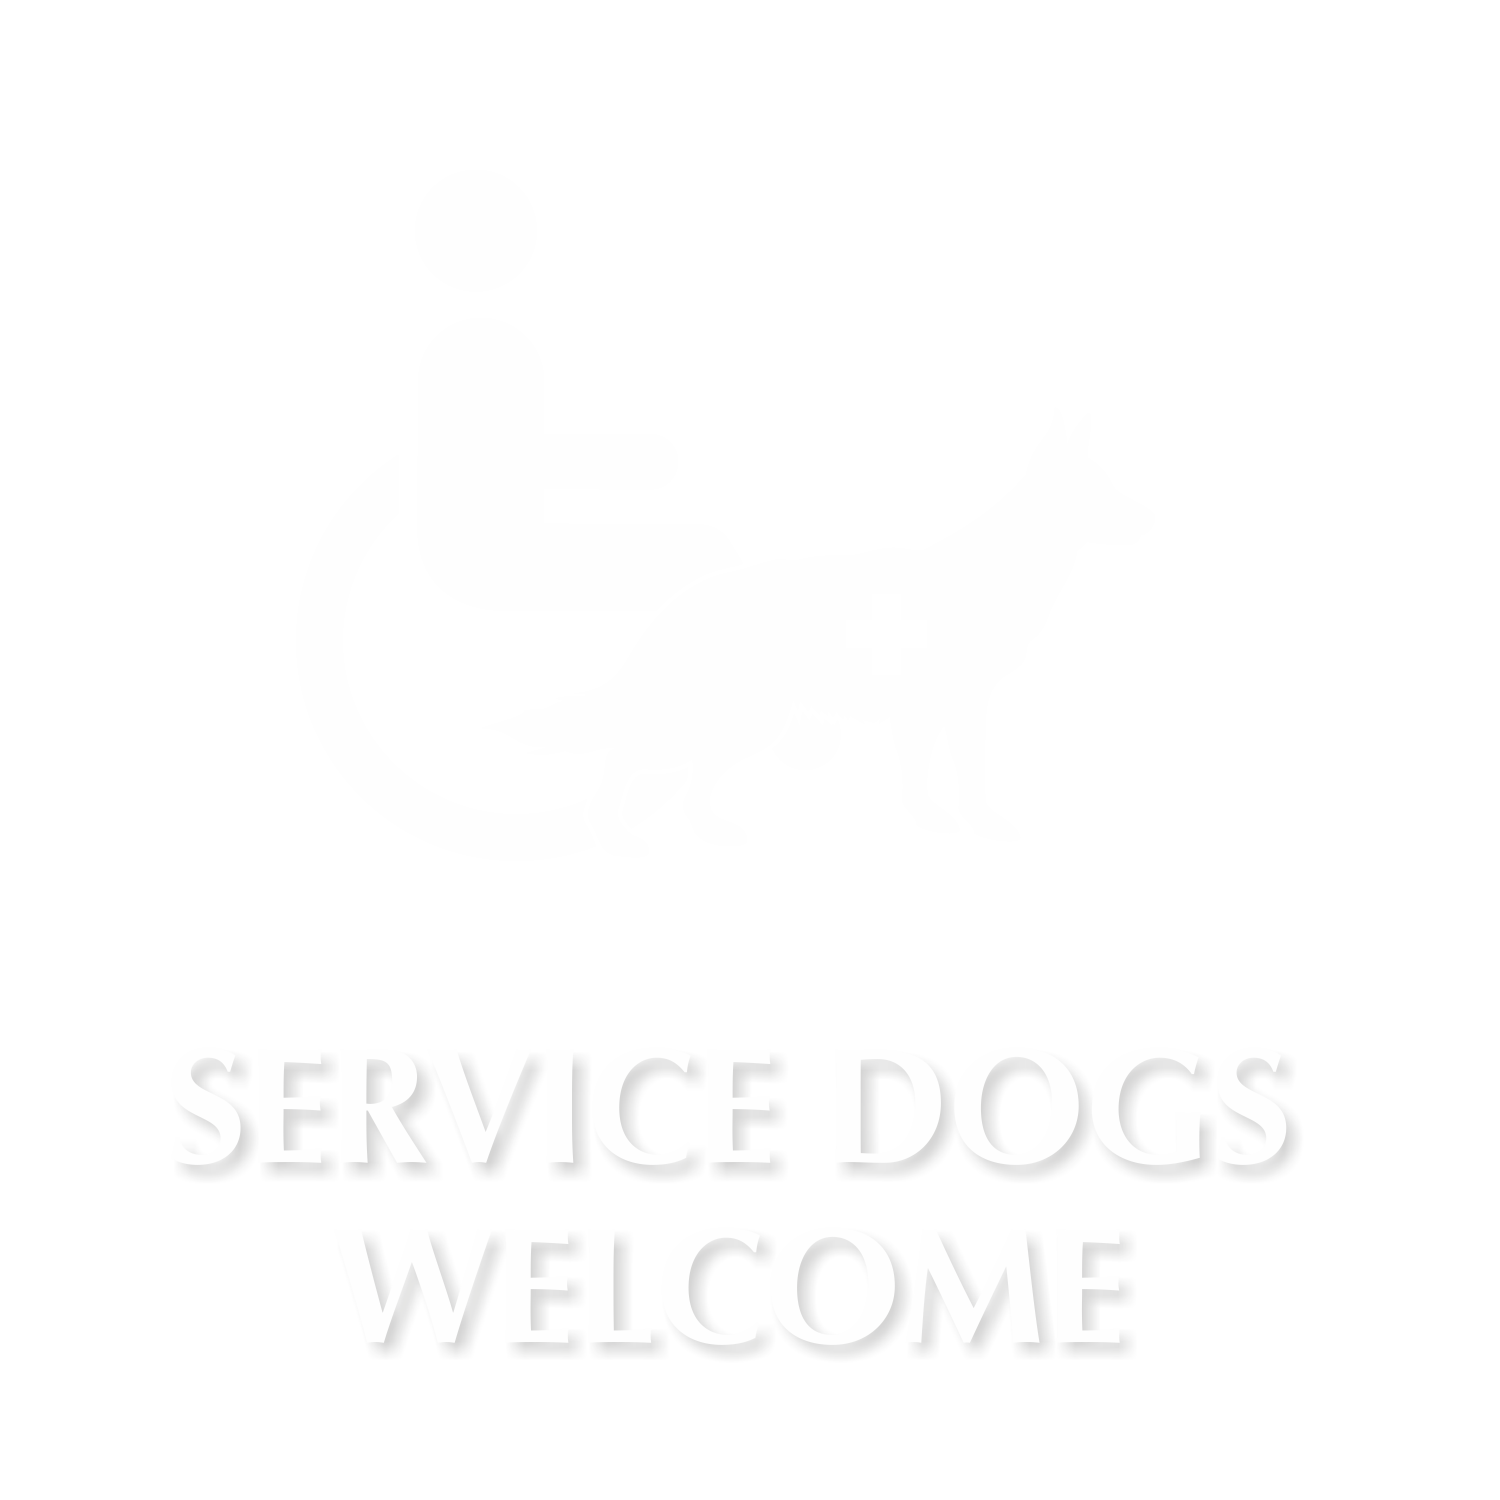 Service Dogs Welcome Engraved Sign